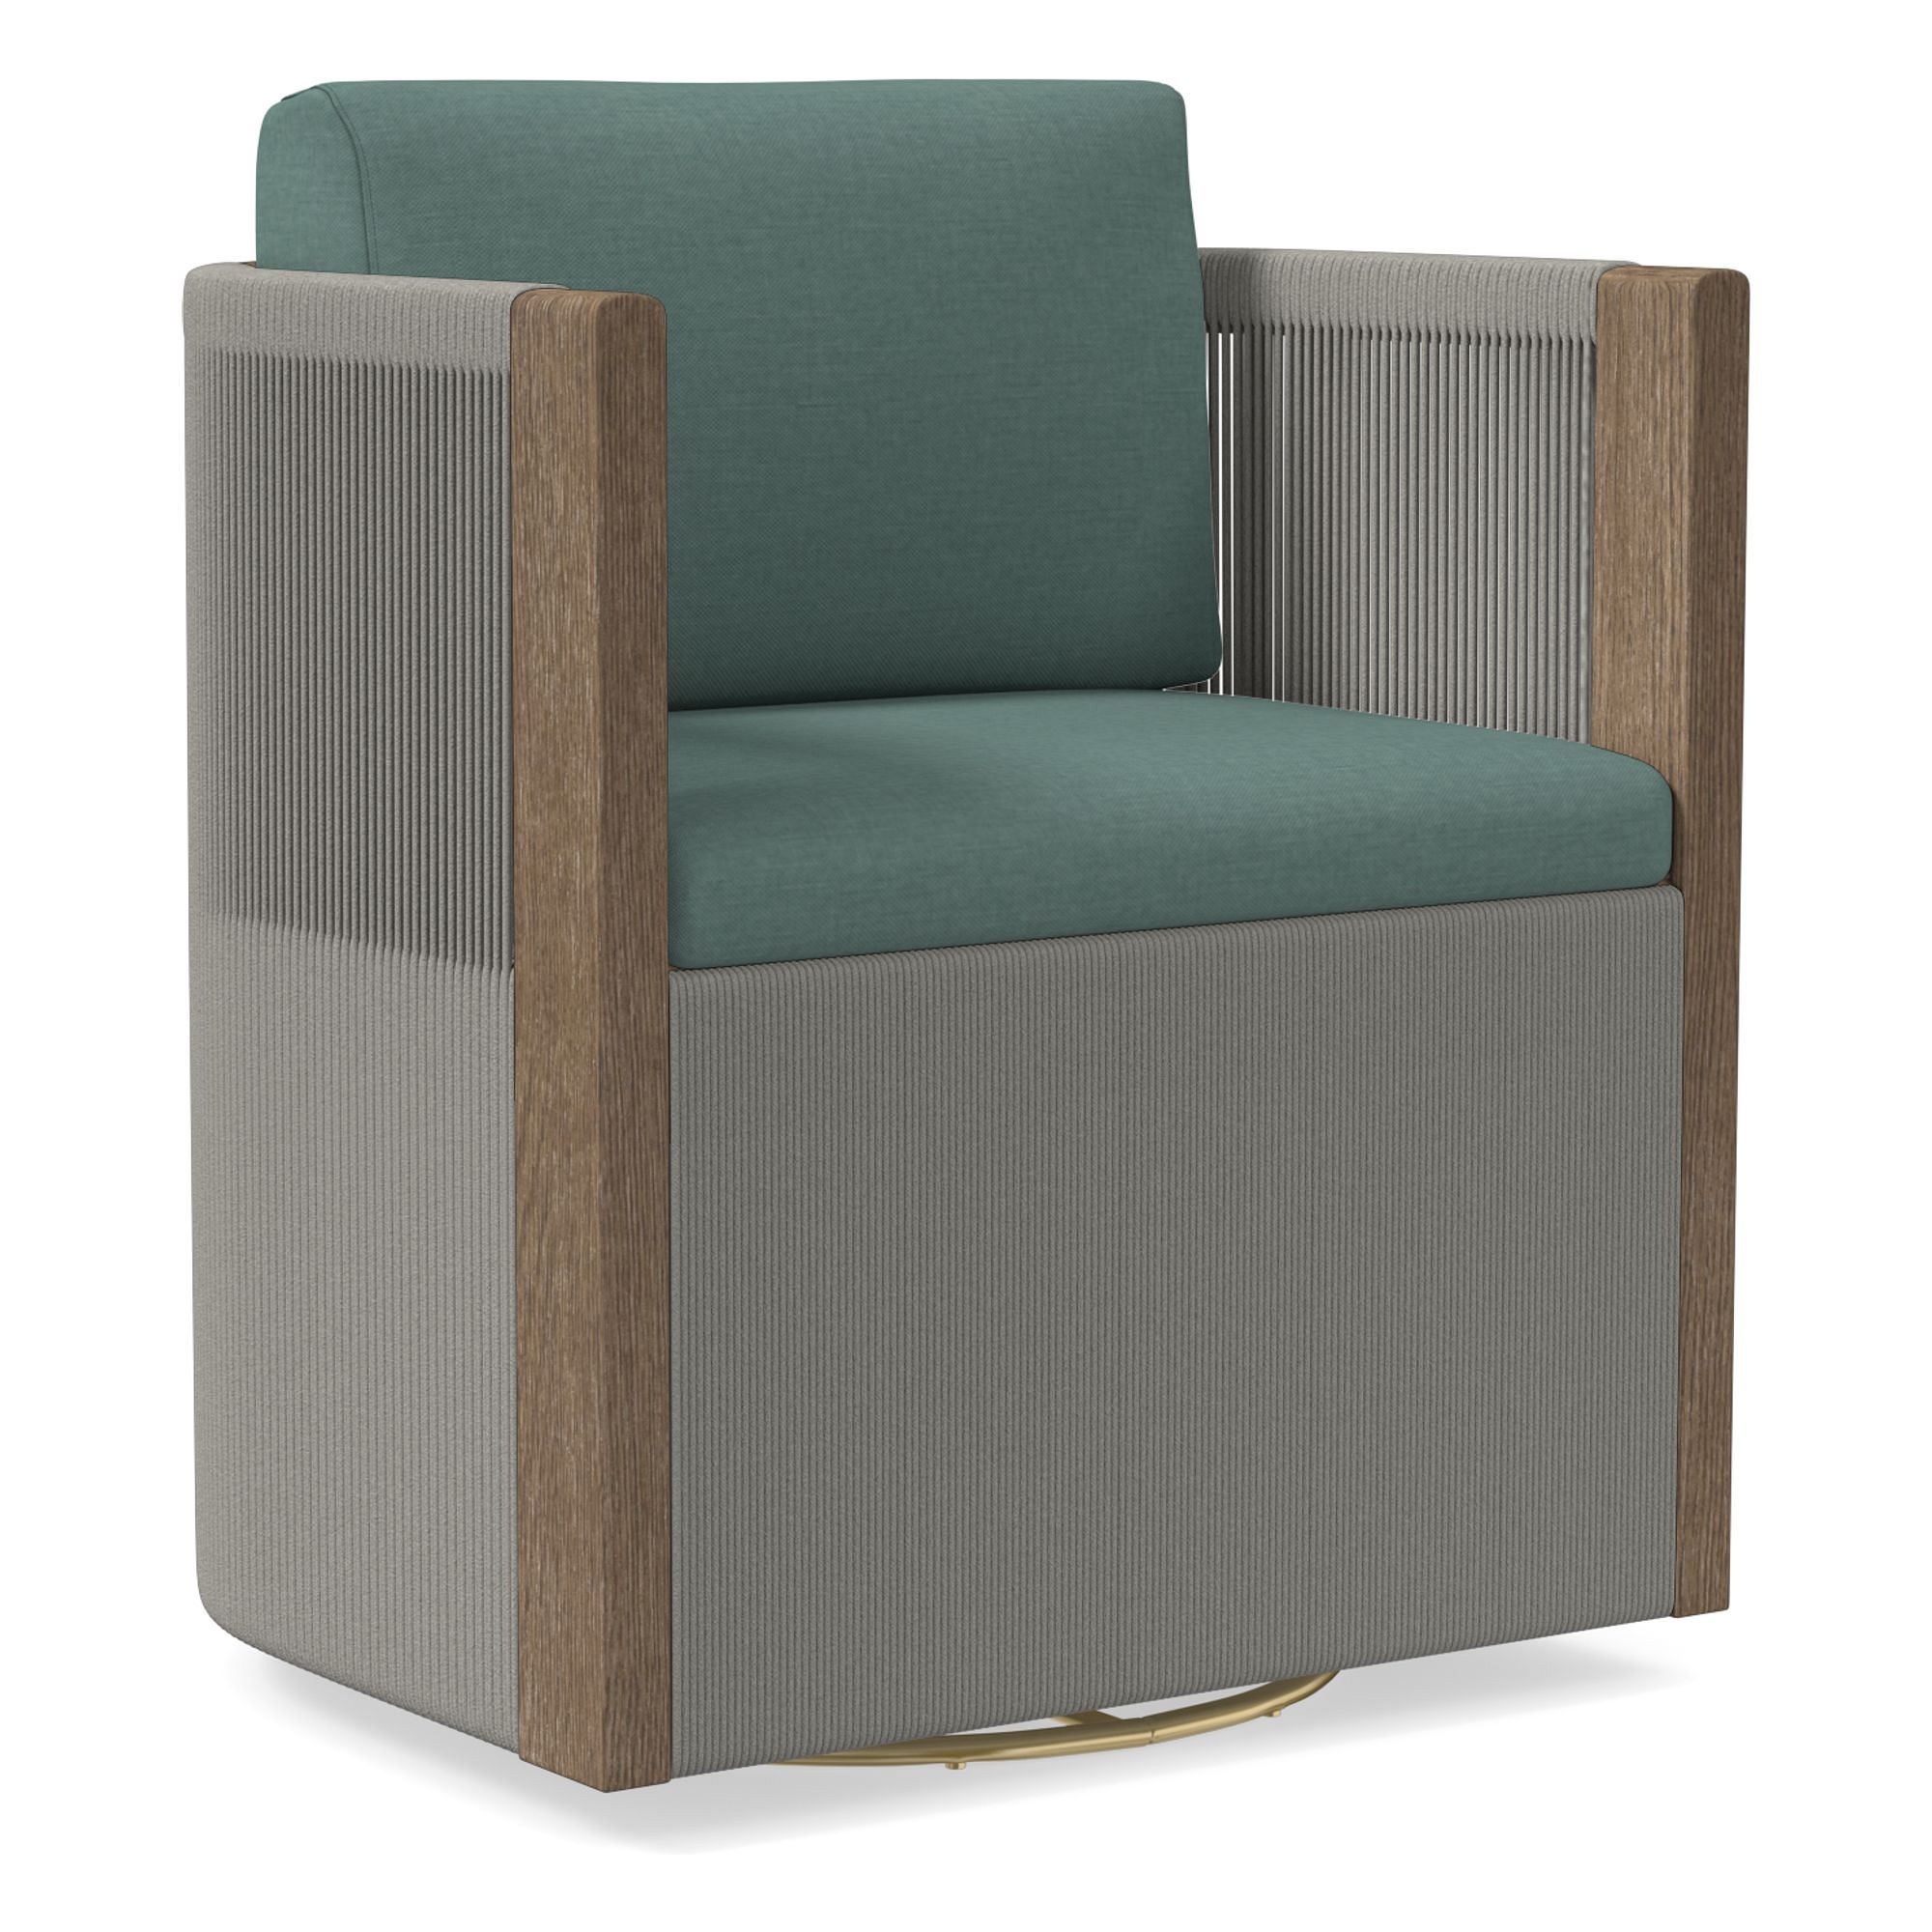 Porto Swivel Dining Chair Cushion Covers | West Elm